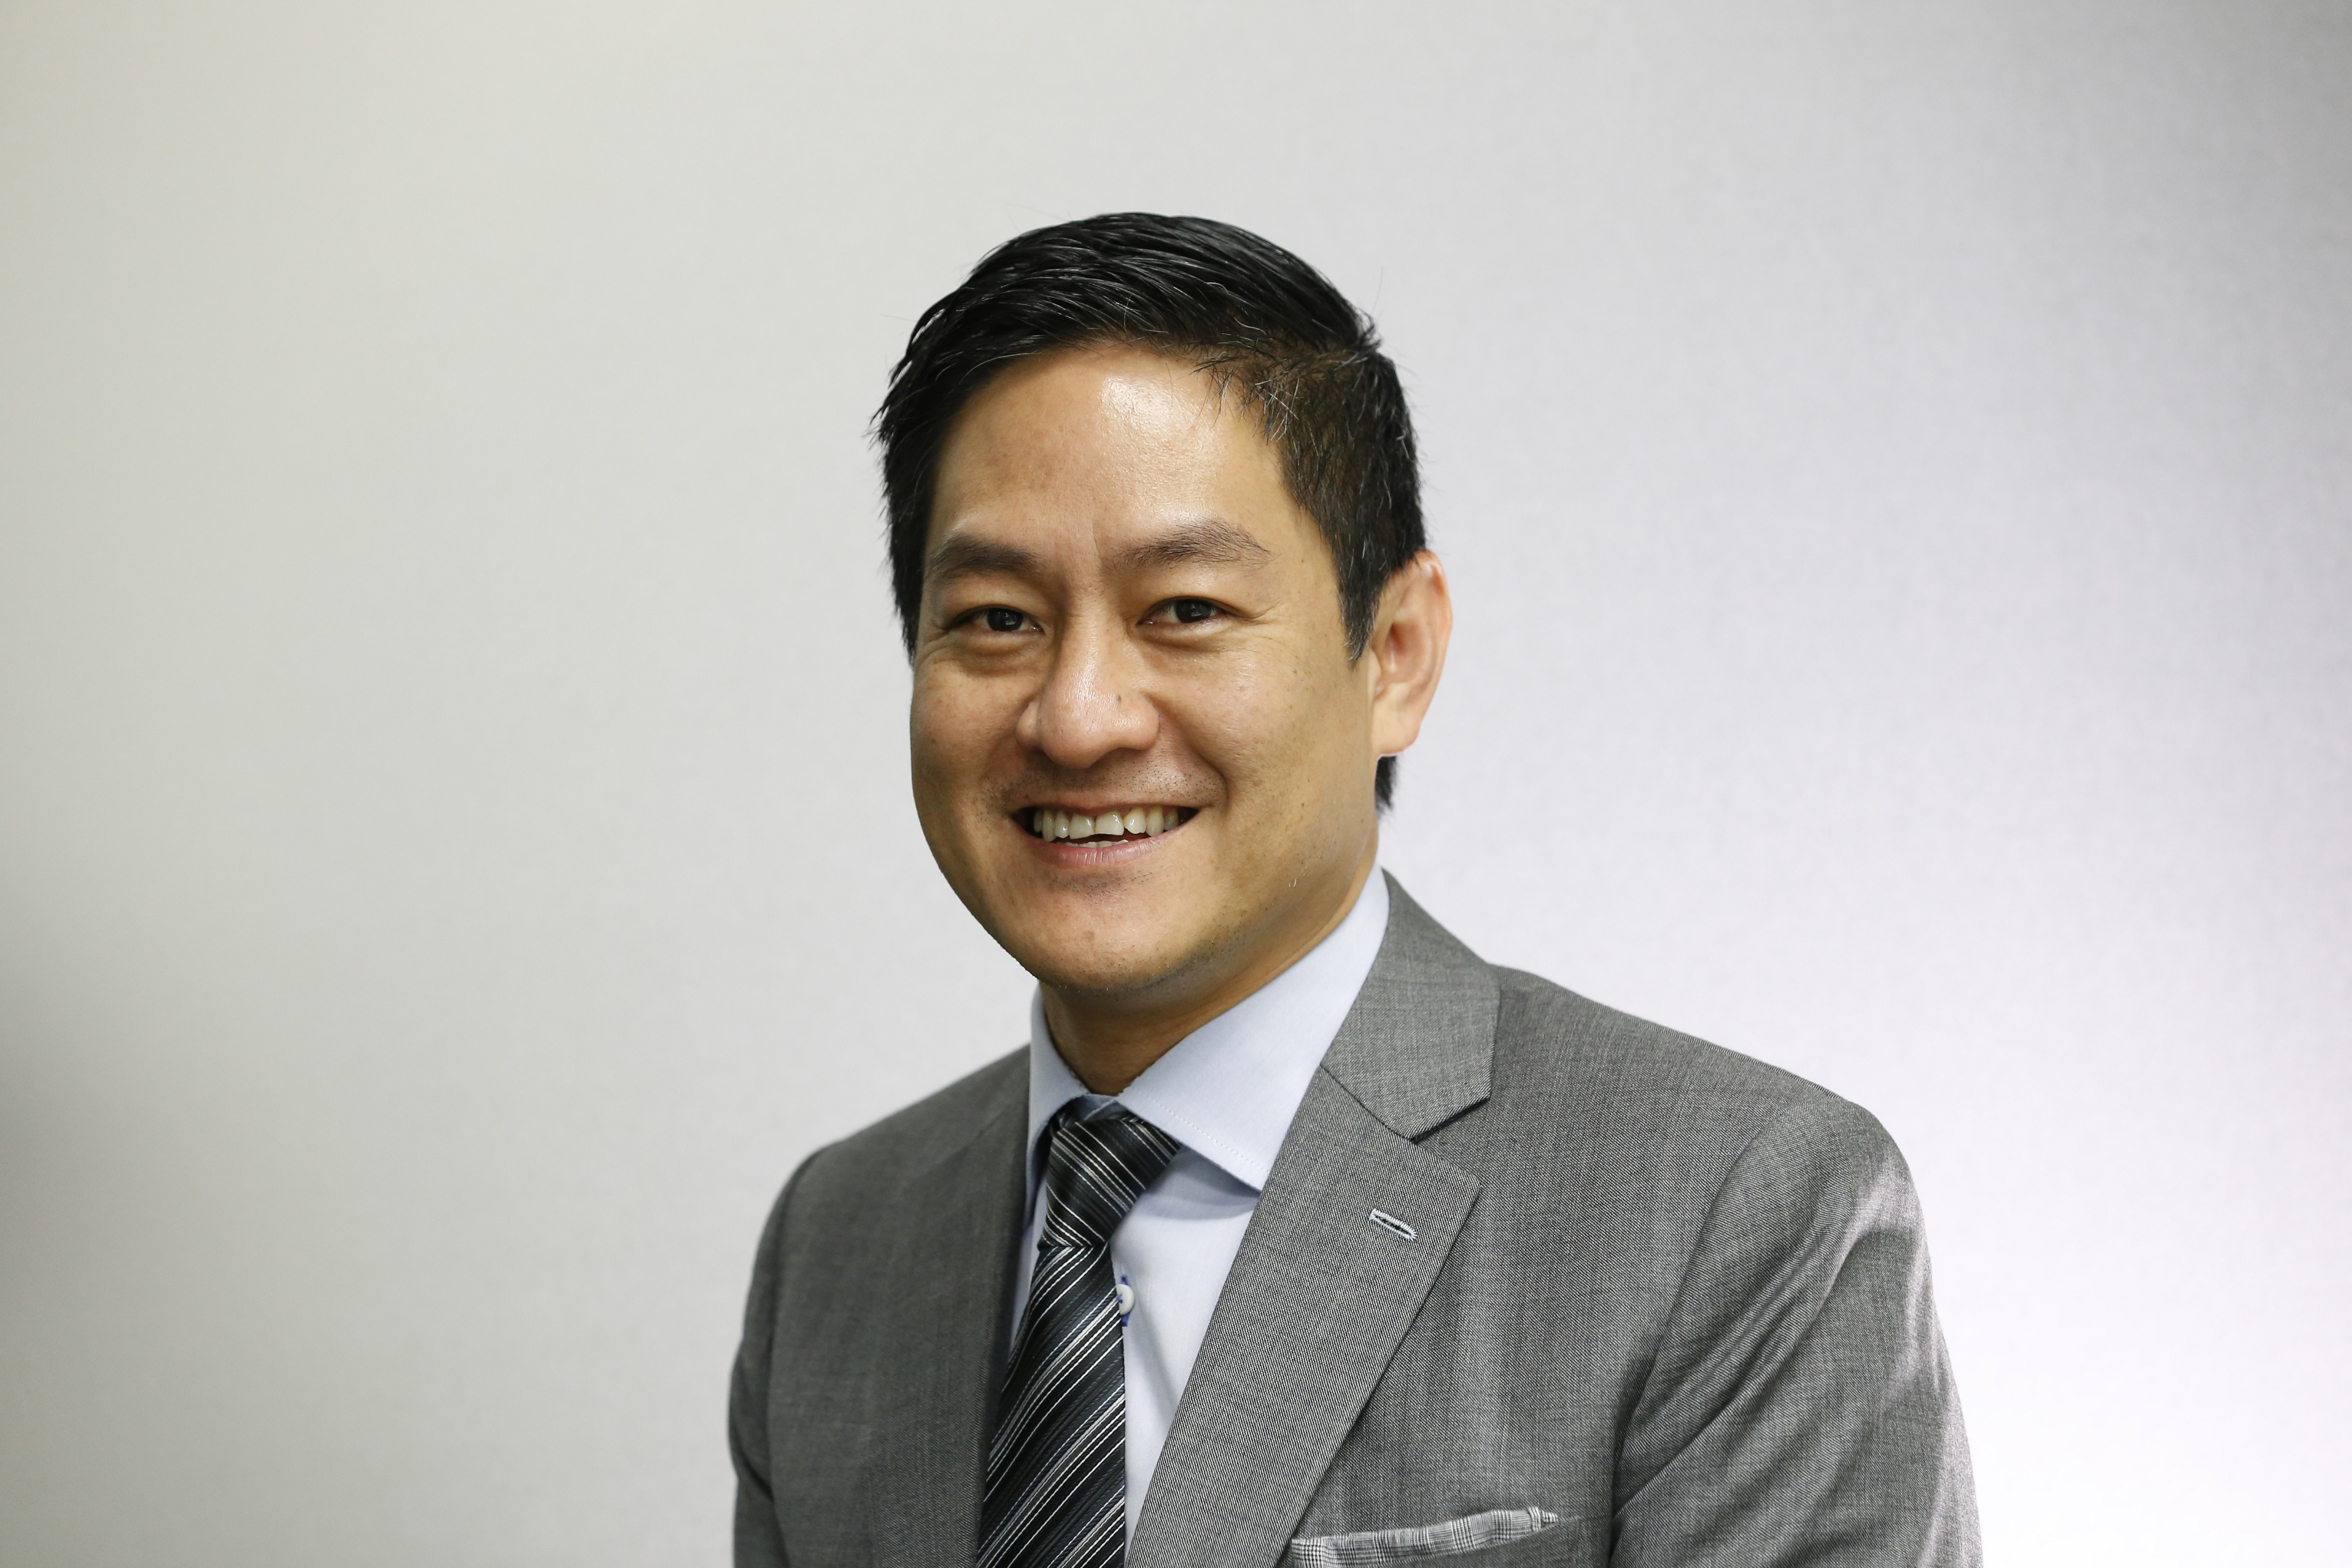 RSA Security promotes Nigel Ng to Vice President of International Sales